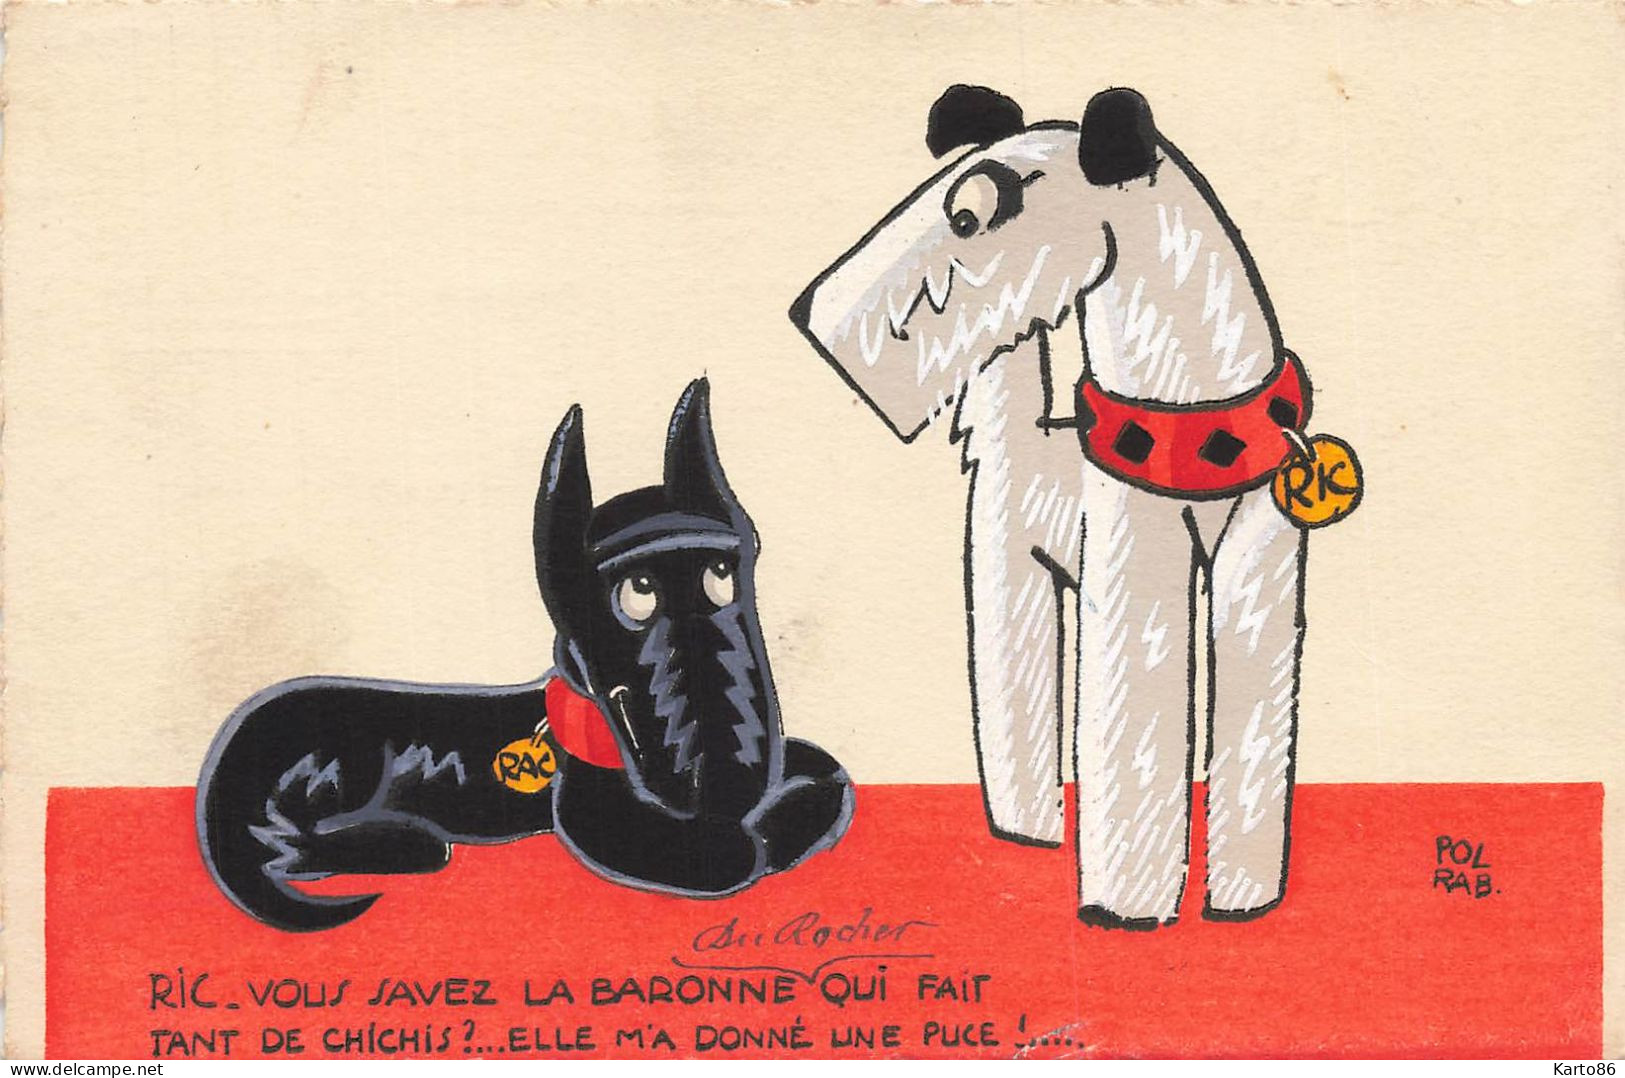 Chiens * CPA Illustrateur POL RAB Pol Rab * Ric ... ! * Carte Postale TUCK * Chien Dog Dogs - Hunde